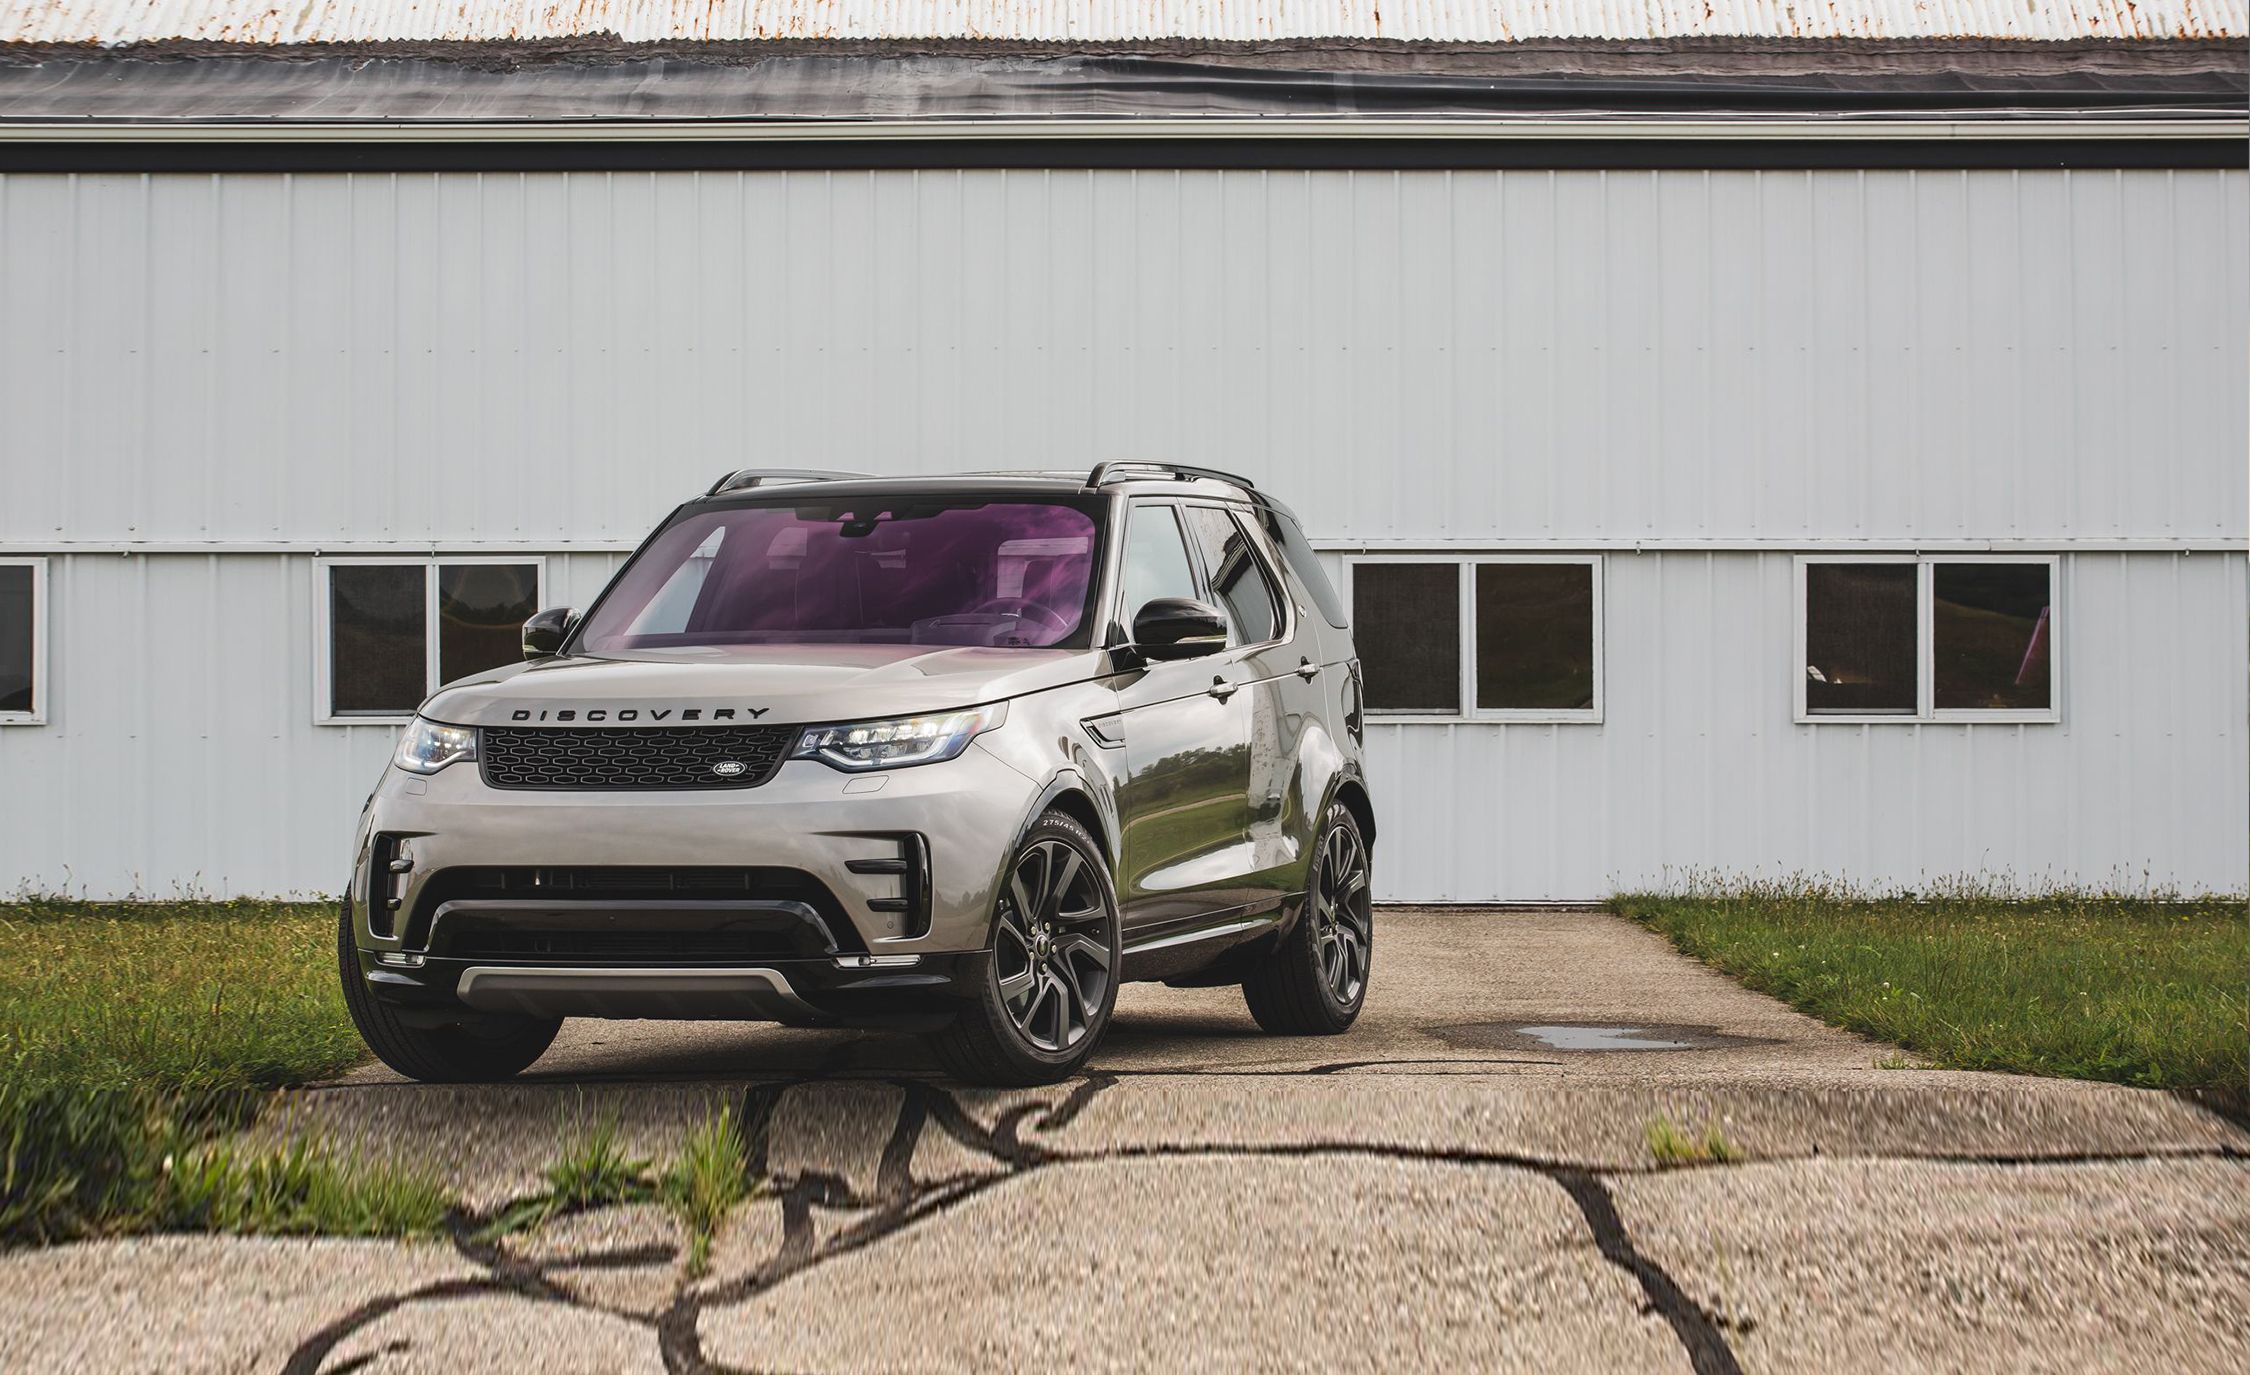 Land Rover Discovery 2019. Land Rover Discovery 5 Dimensions. Ленд ровер дискавери 2019